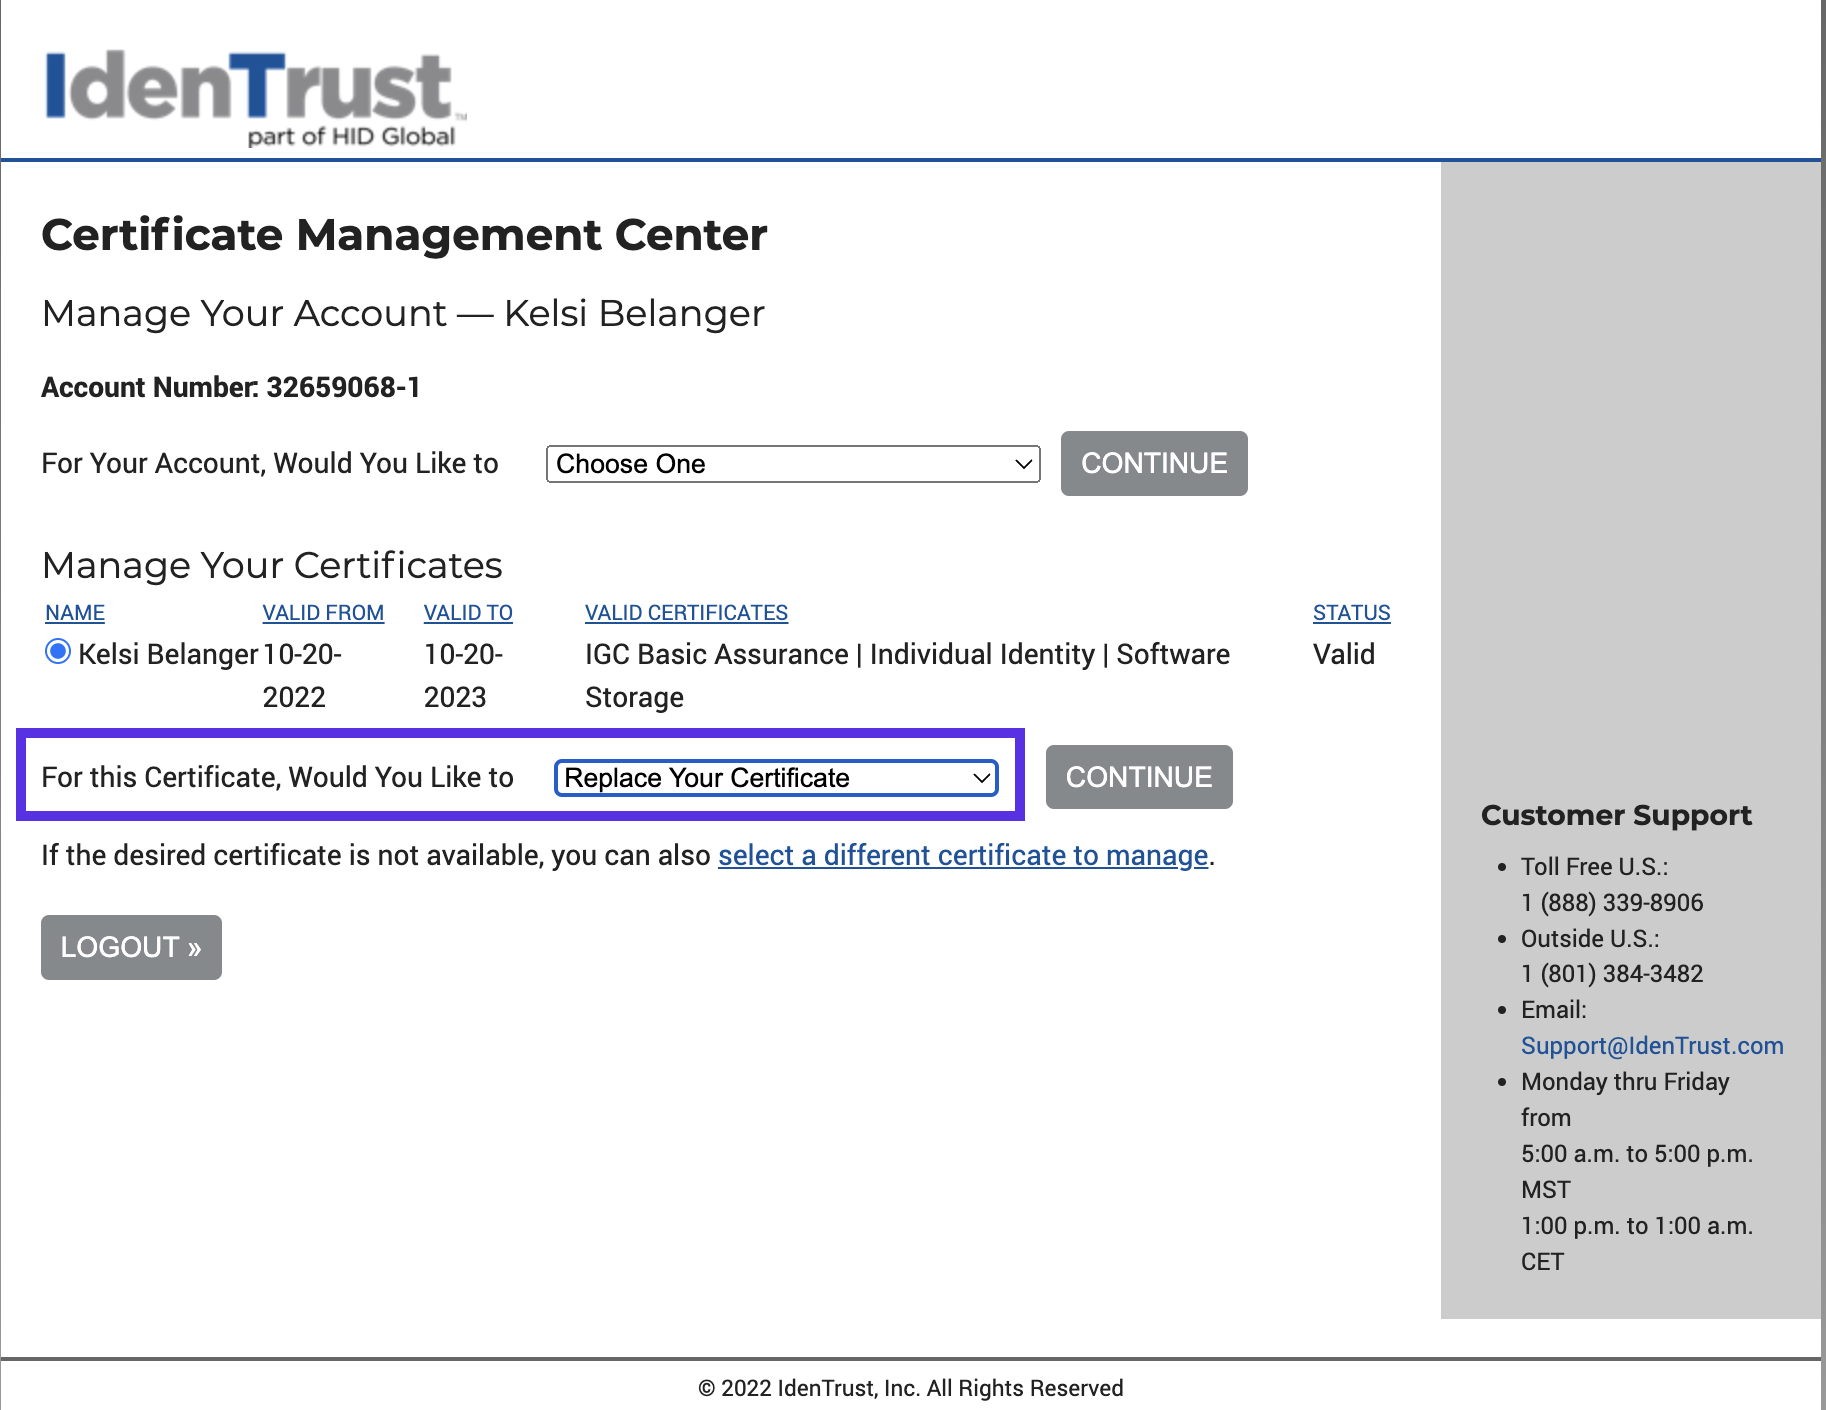 Screenshot of IdenTrust Certificate Management Center with For this Certificate, Would You Like to outlined and Replace Your Certificate selected from the drop down